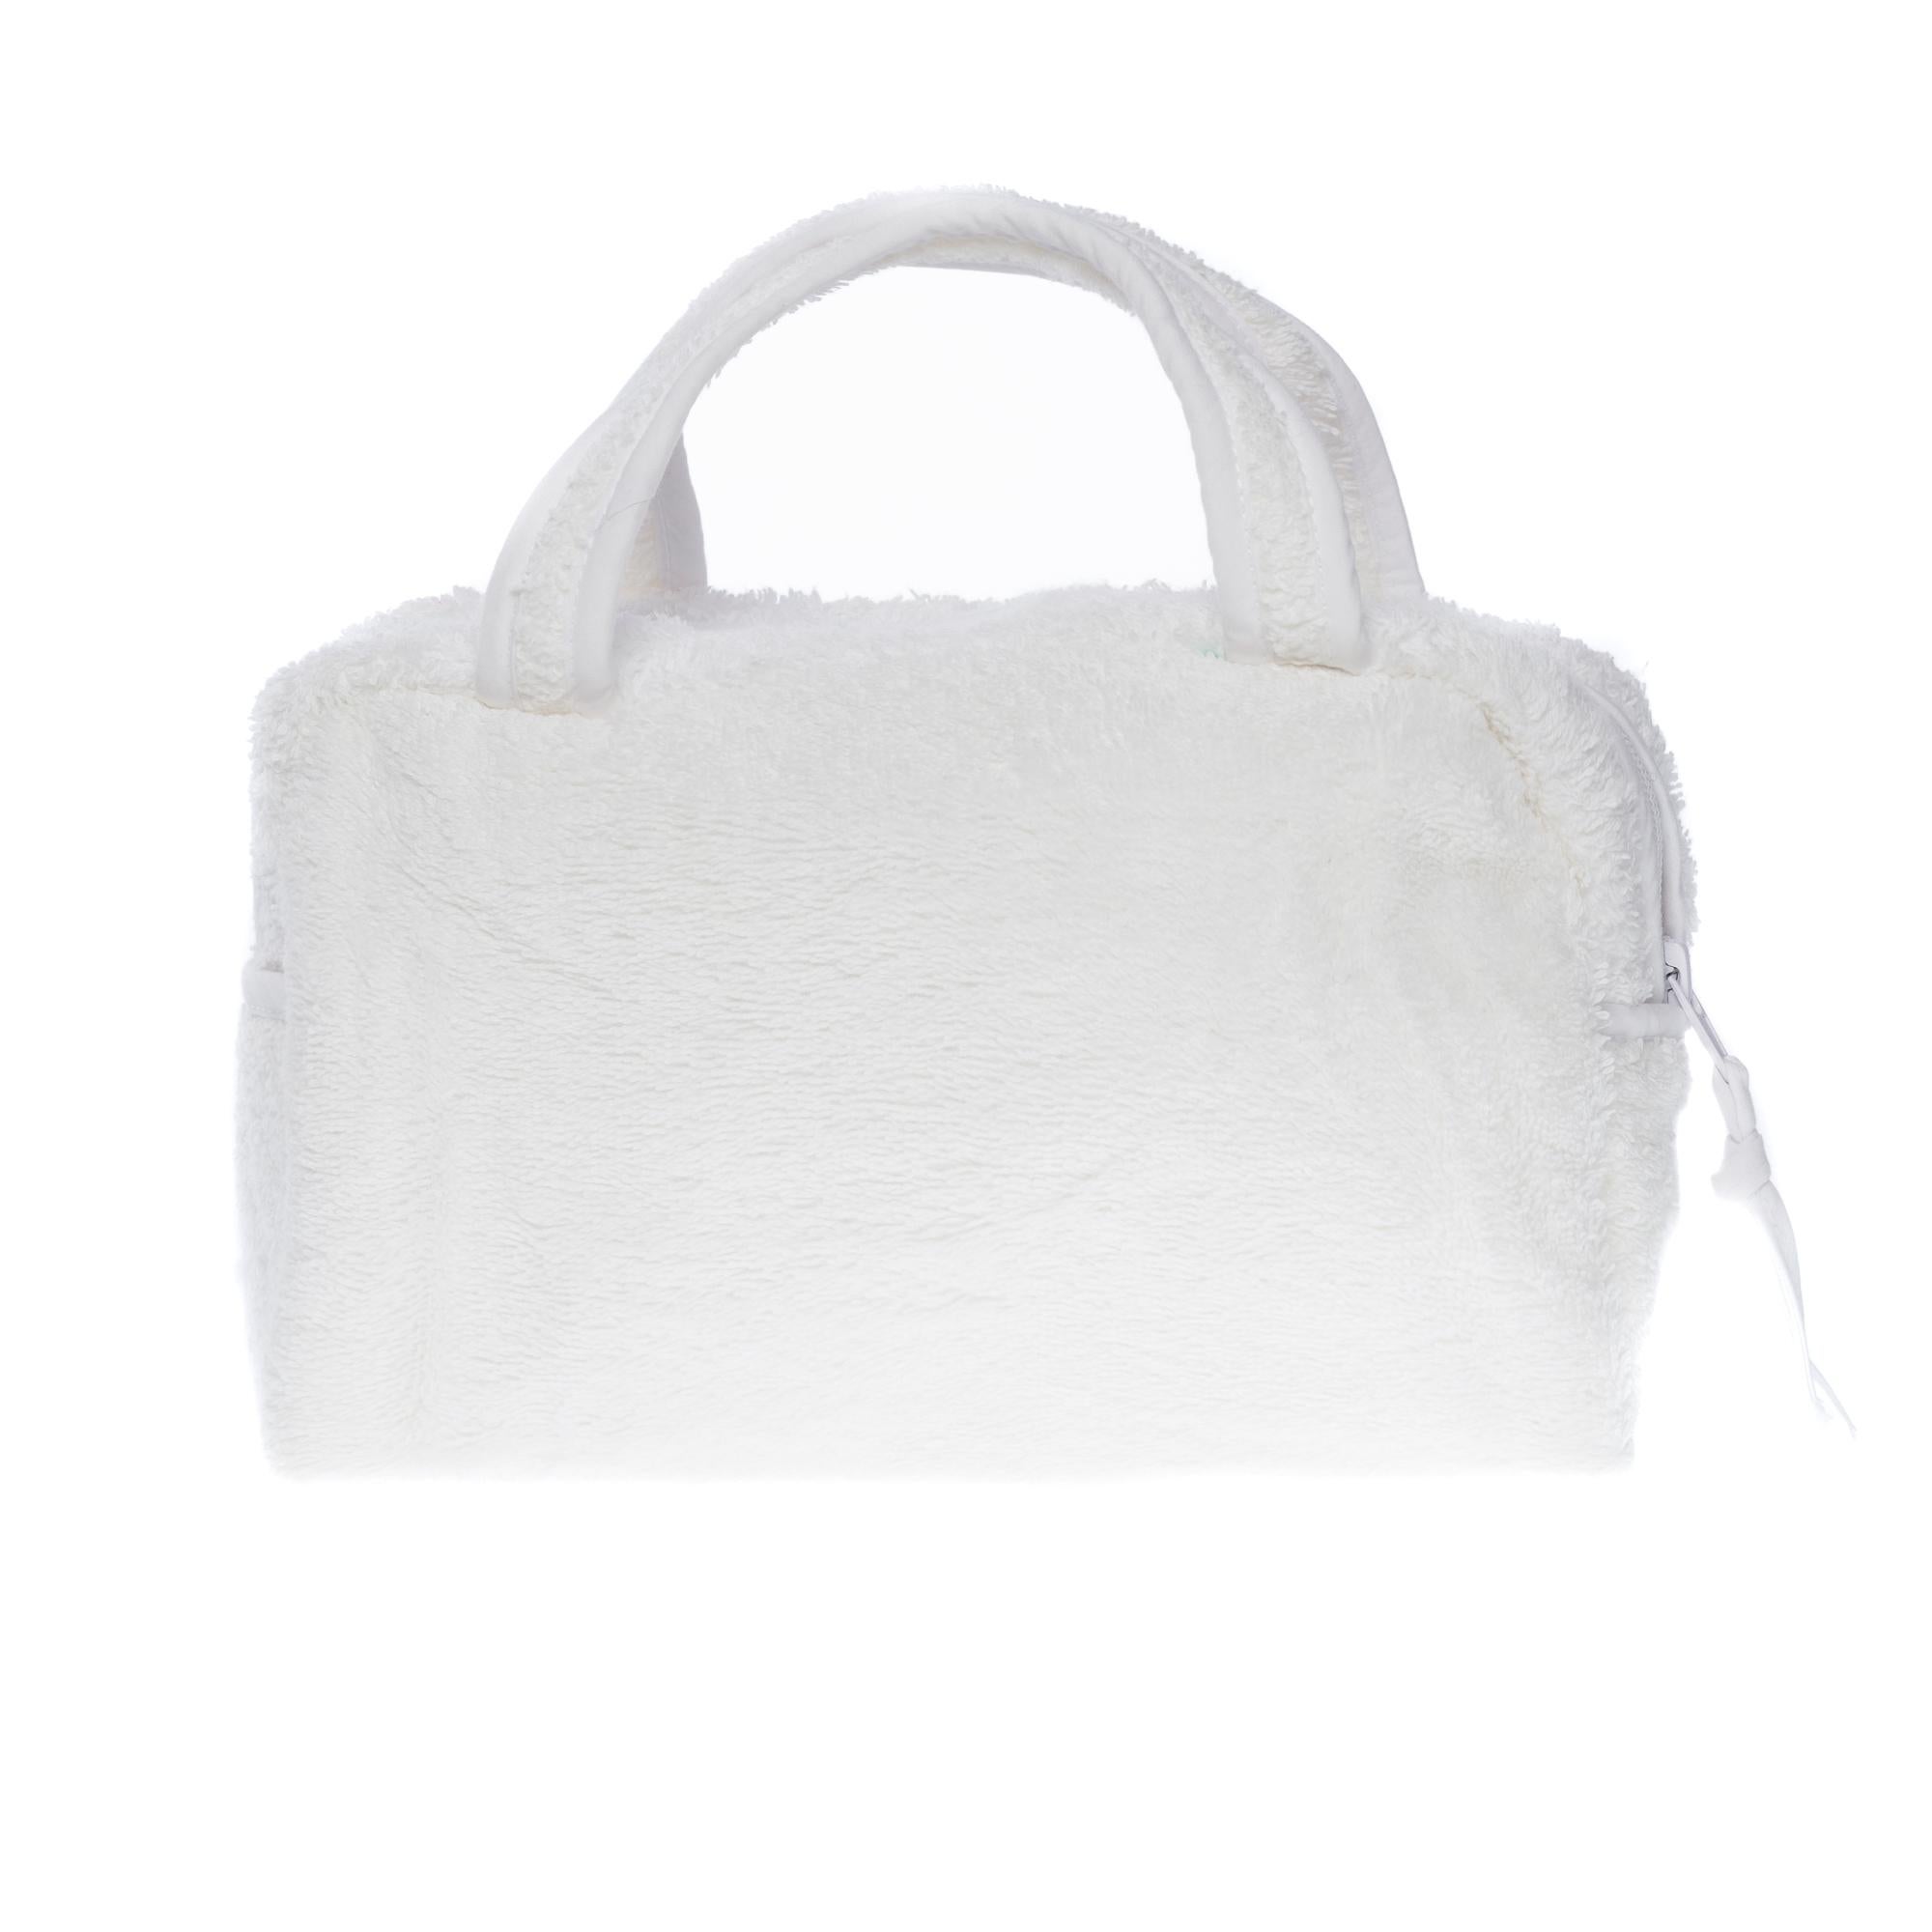 Designed by John Galliano for Dior in the 1990s. This handbag is made of white cotton with the emblematic slogan 